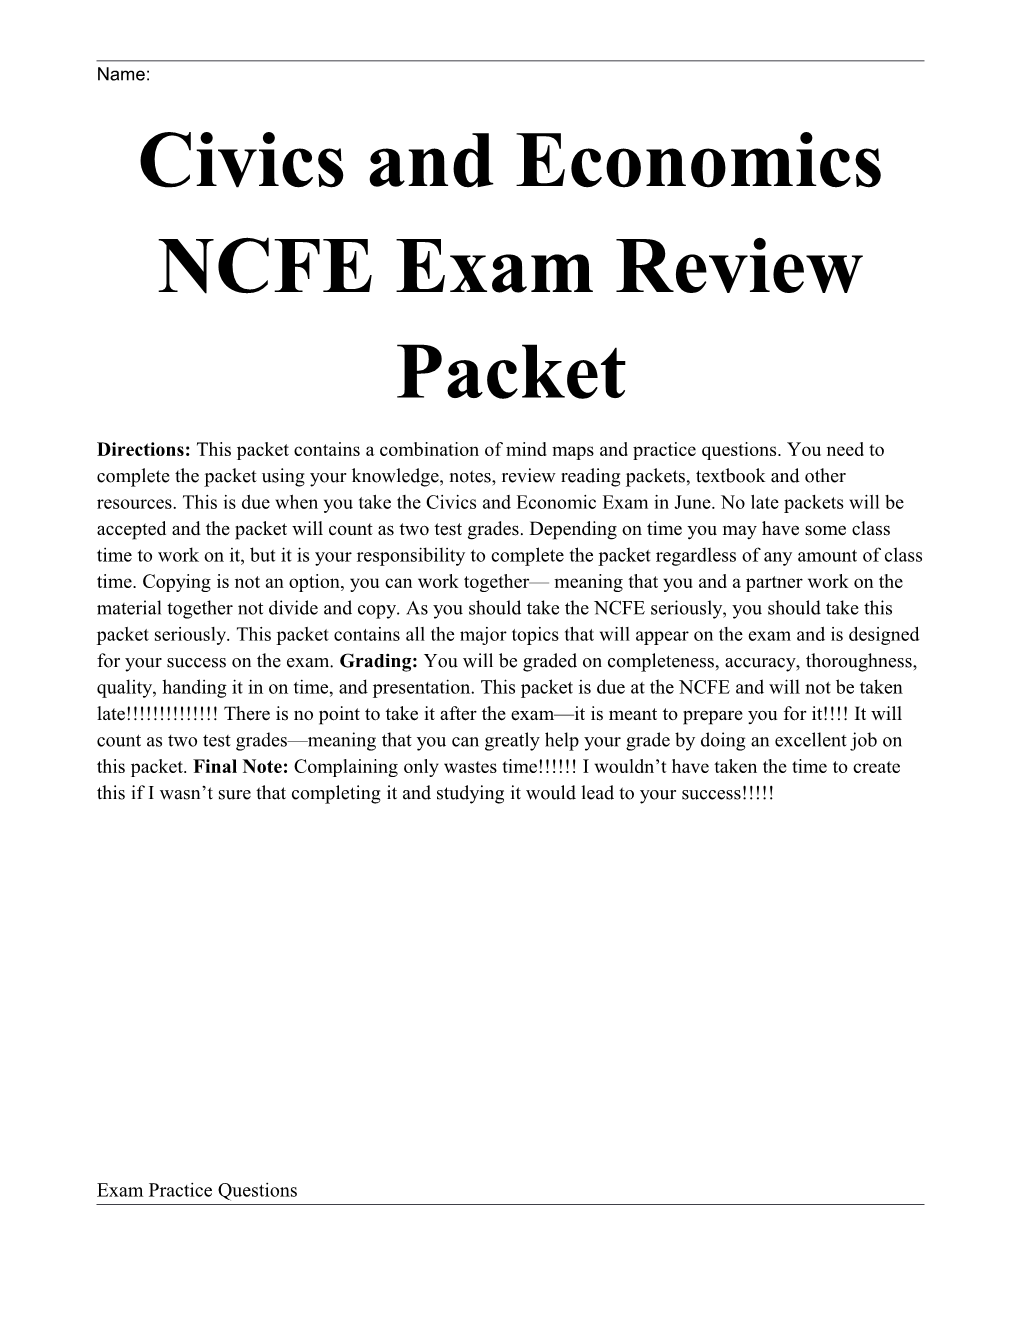 Civics and Economics NCFE Exam Review Packet